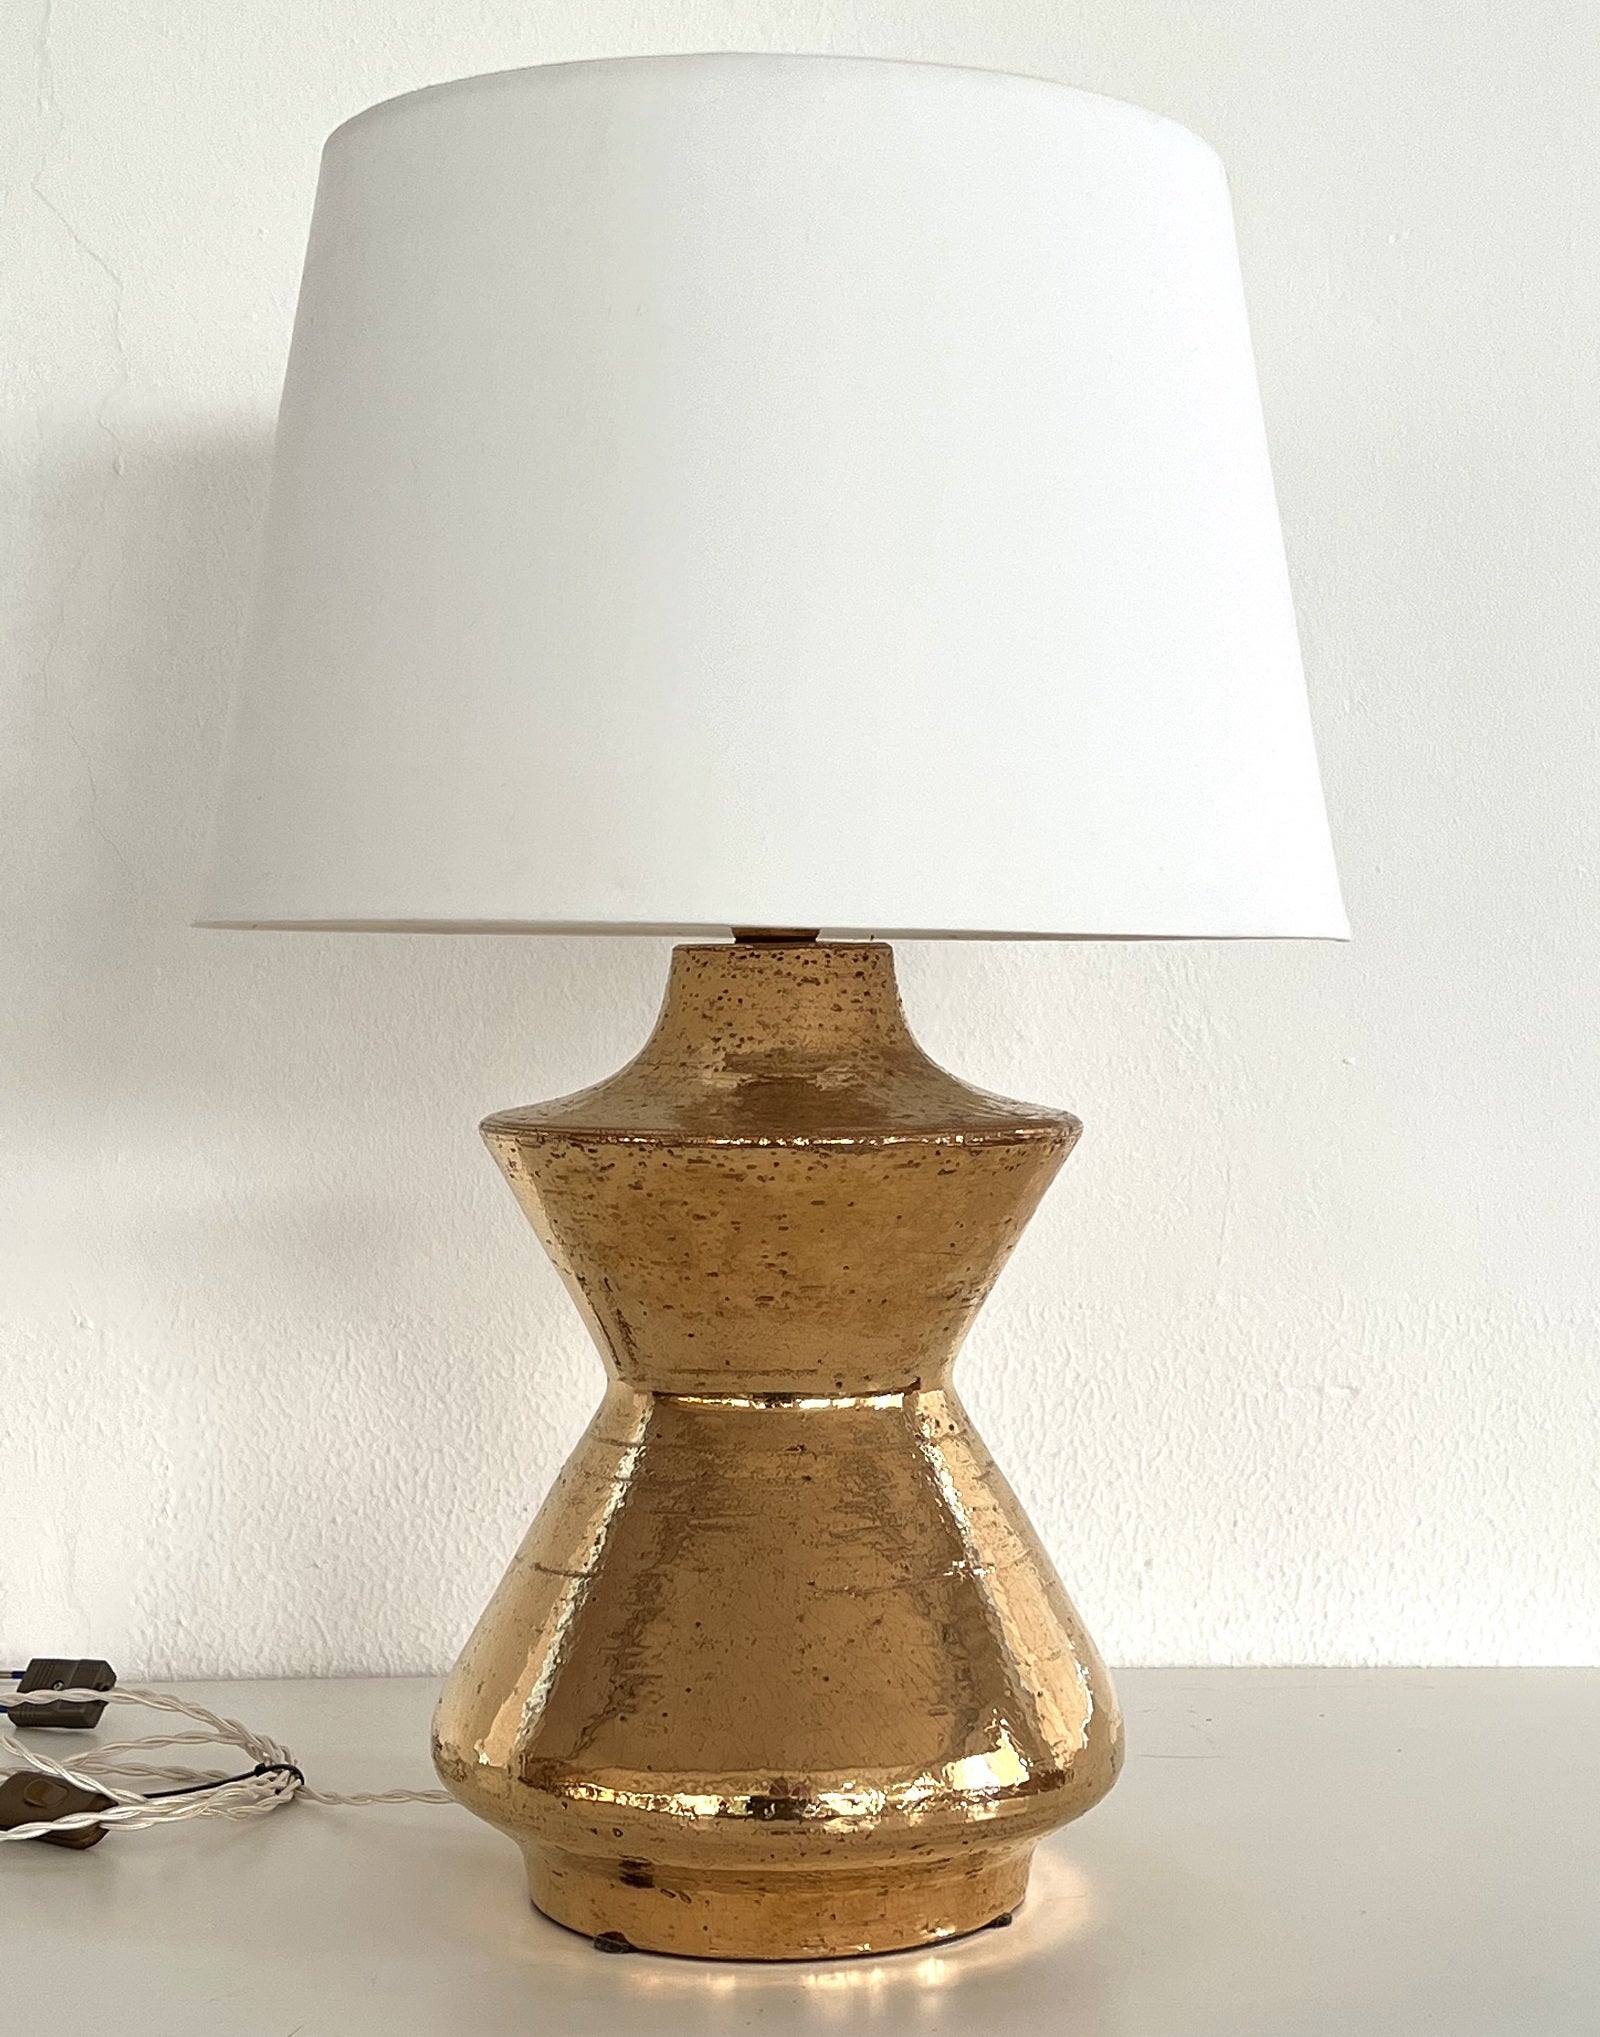 Gorgeous shiny ceramic table lamp designed and made from Aldo Londi in the 1970s for Bitossi.
This heavy, organic ceramic body is made in gold metallic glaze and a beautiful eye-catcher.
It's in wonderful vintage condition, no defects.
The lamp has